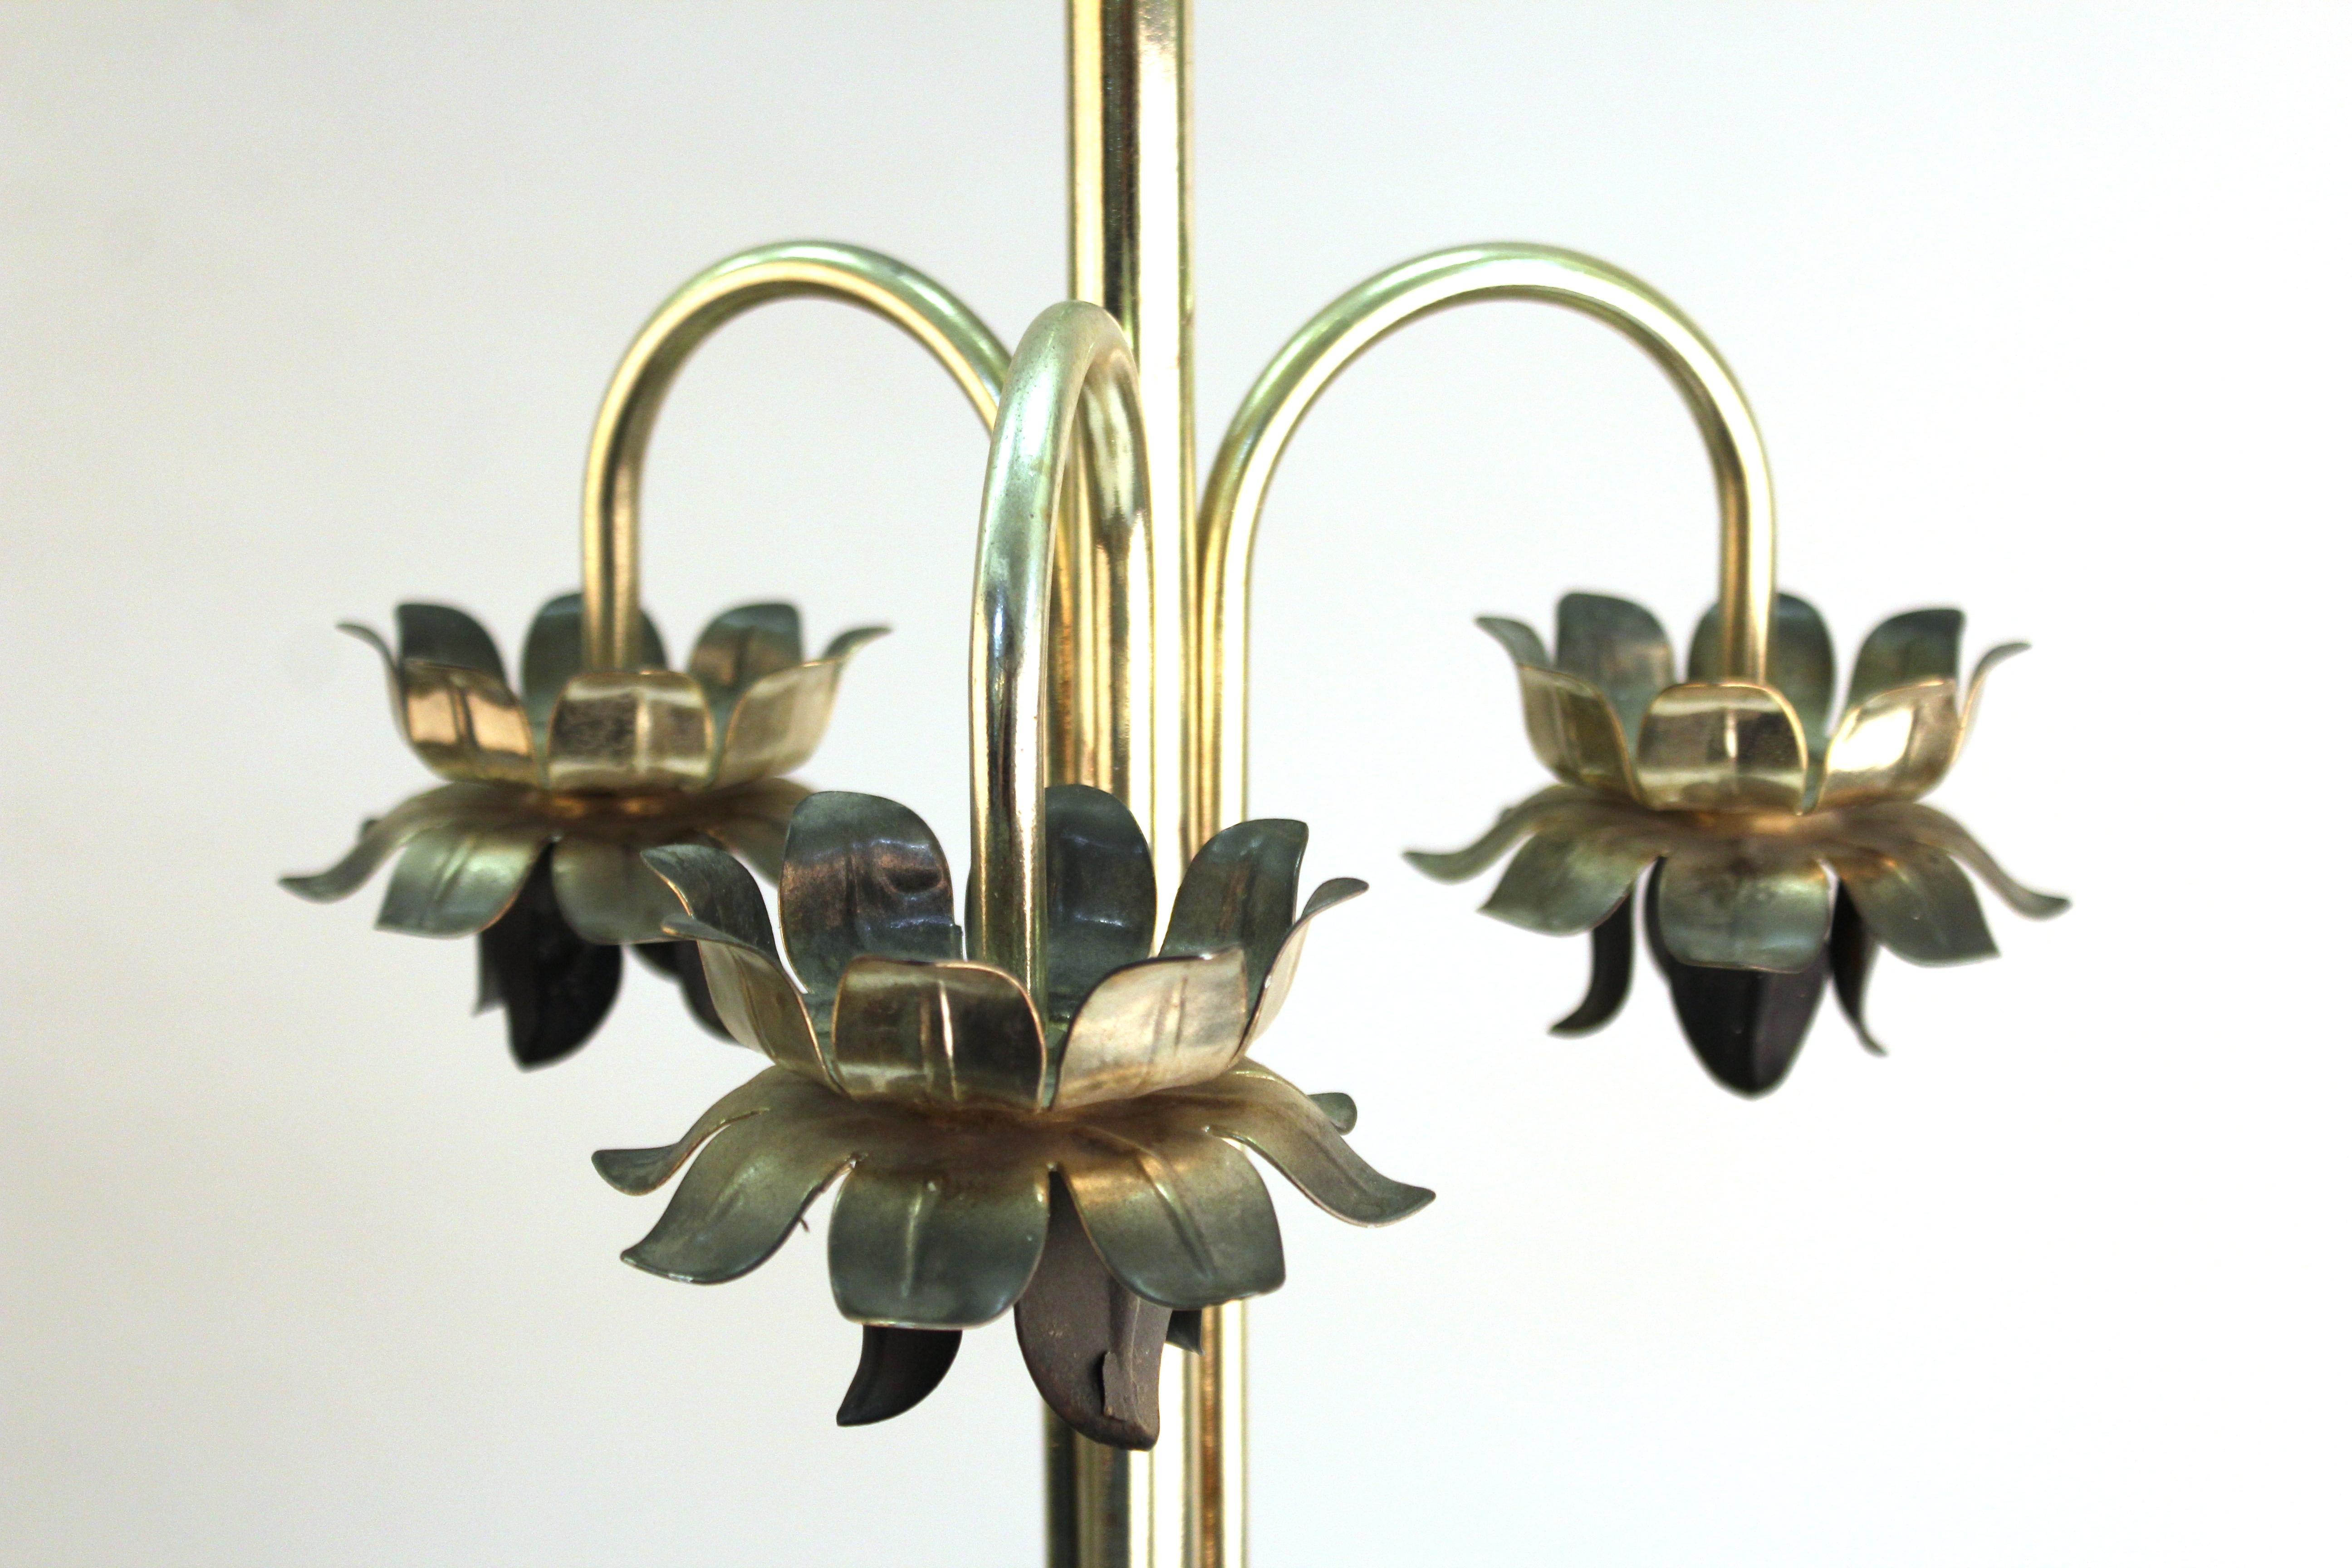 Mid-Century Modern metal table lamp with curved leaves at the circular base and three flower buds with petals. Two light bulb sockets on the top. The piece is in great vintage condition with age-appropriate wear.